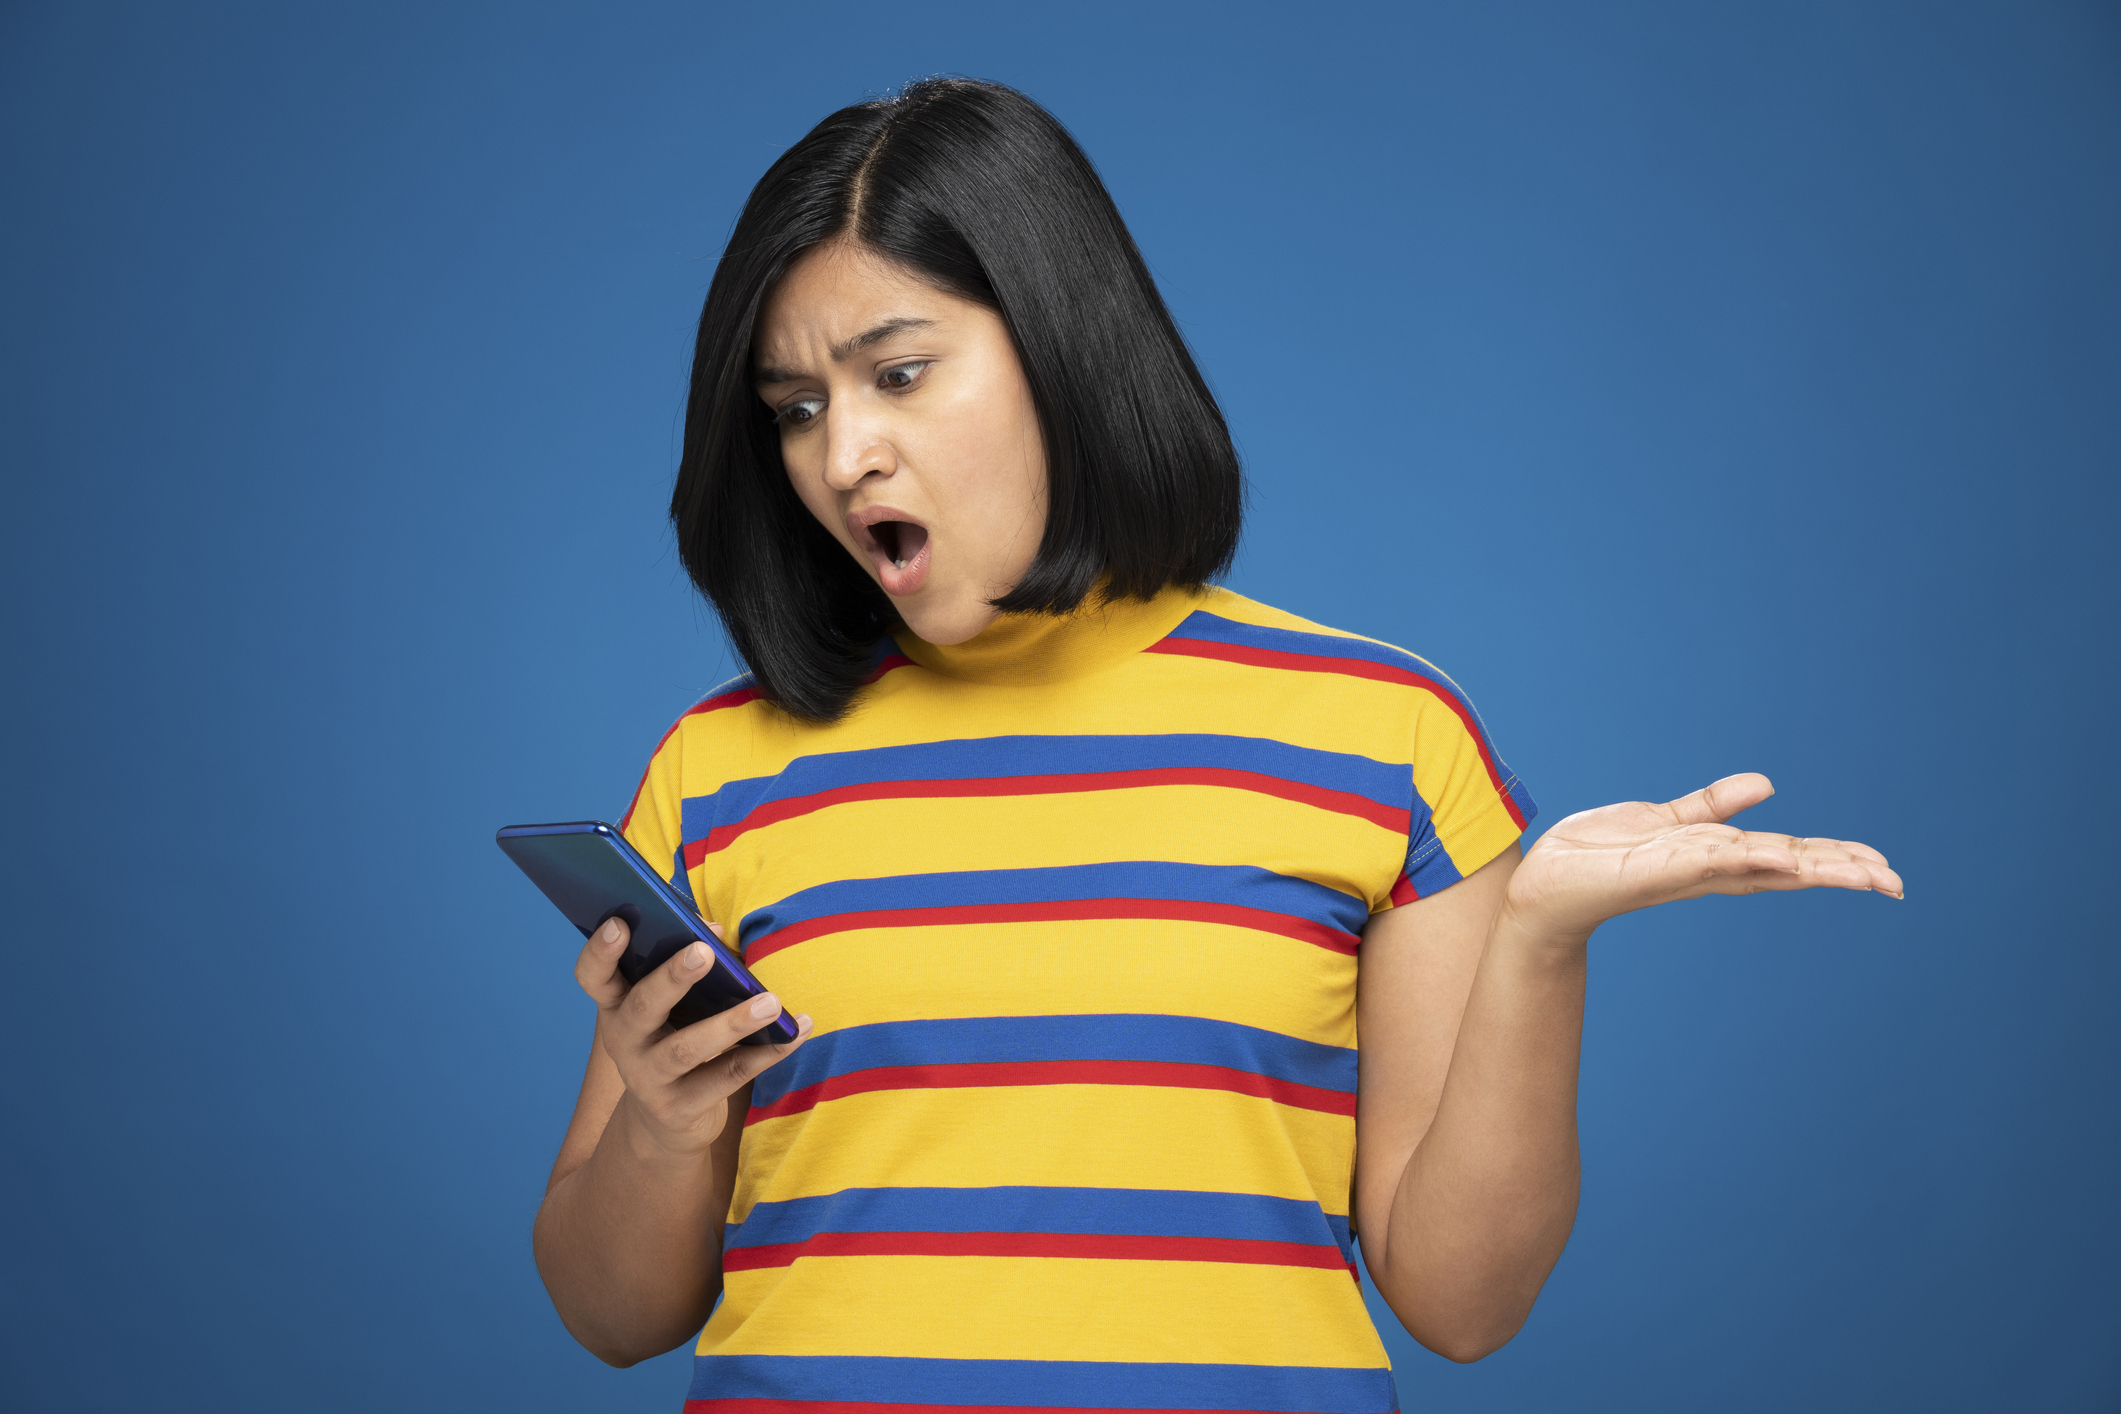 A woman looking flabbergasted at something on her phone